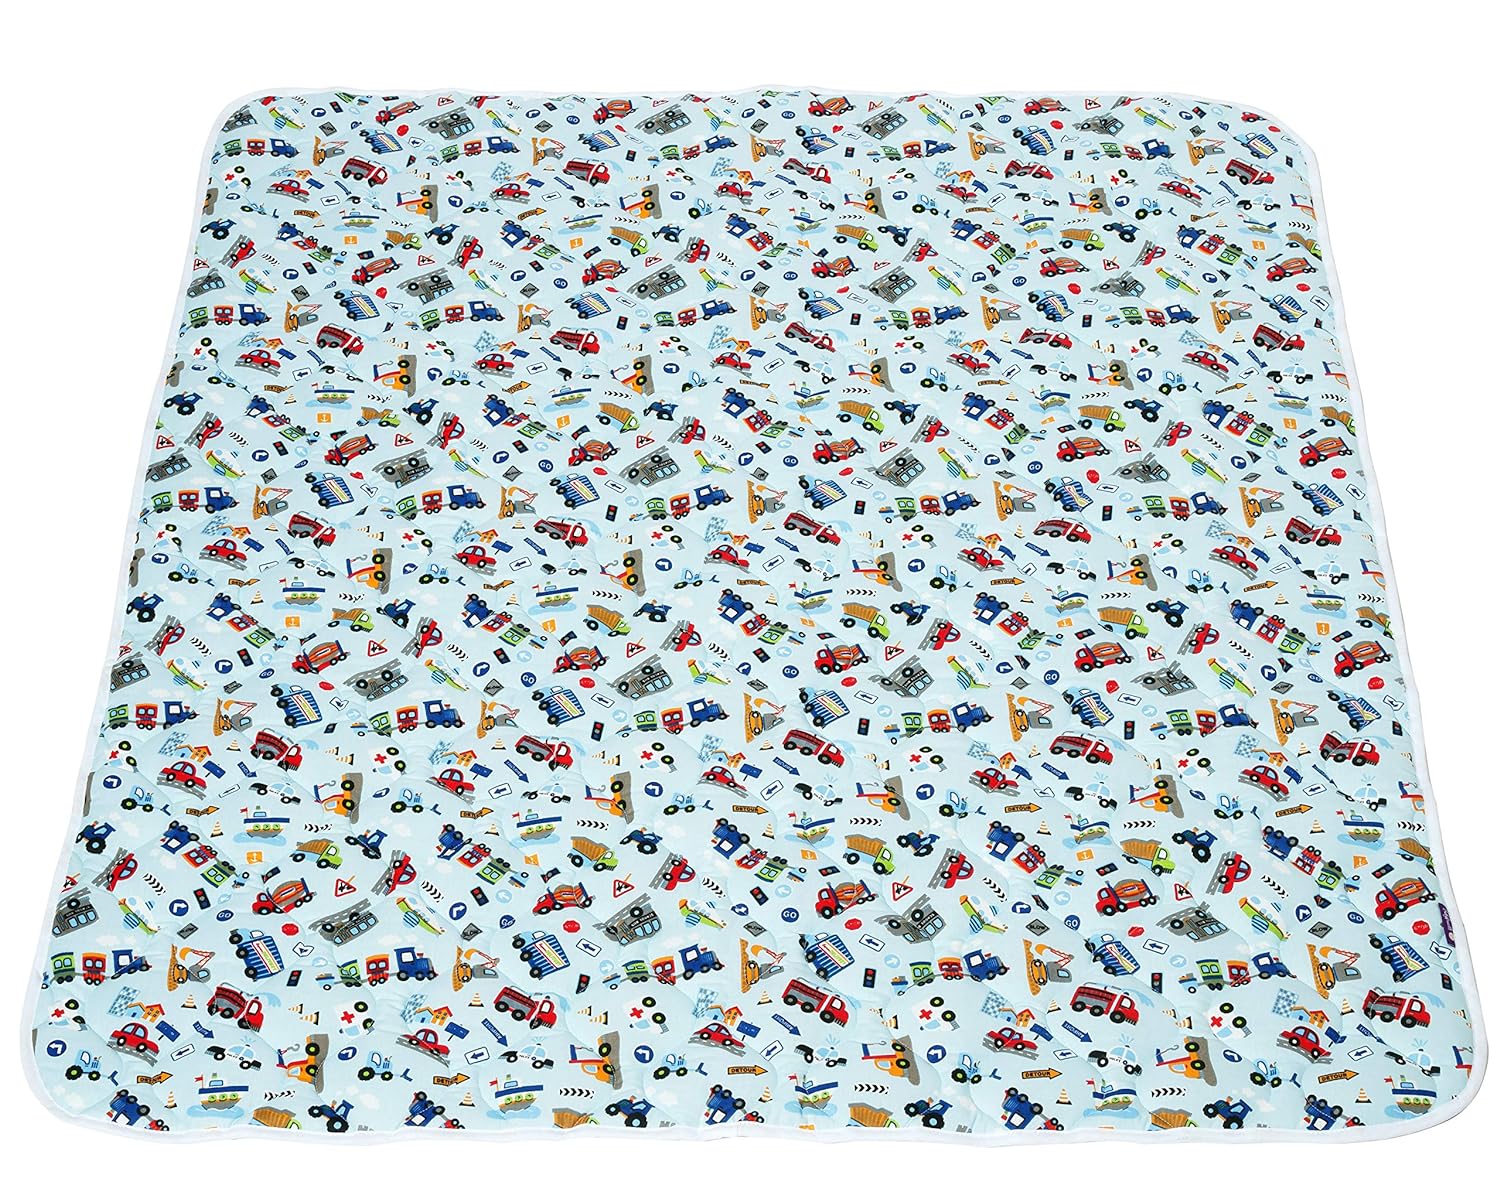 Babyfrücht BLP Crawling Blanket for Vehicles Blue Non-Slip and Waterproof Series: Base-Line Premium (BLP) Item 10204 Approximately 130 x 150 cm Washable at 30 °C